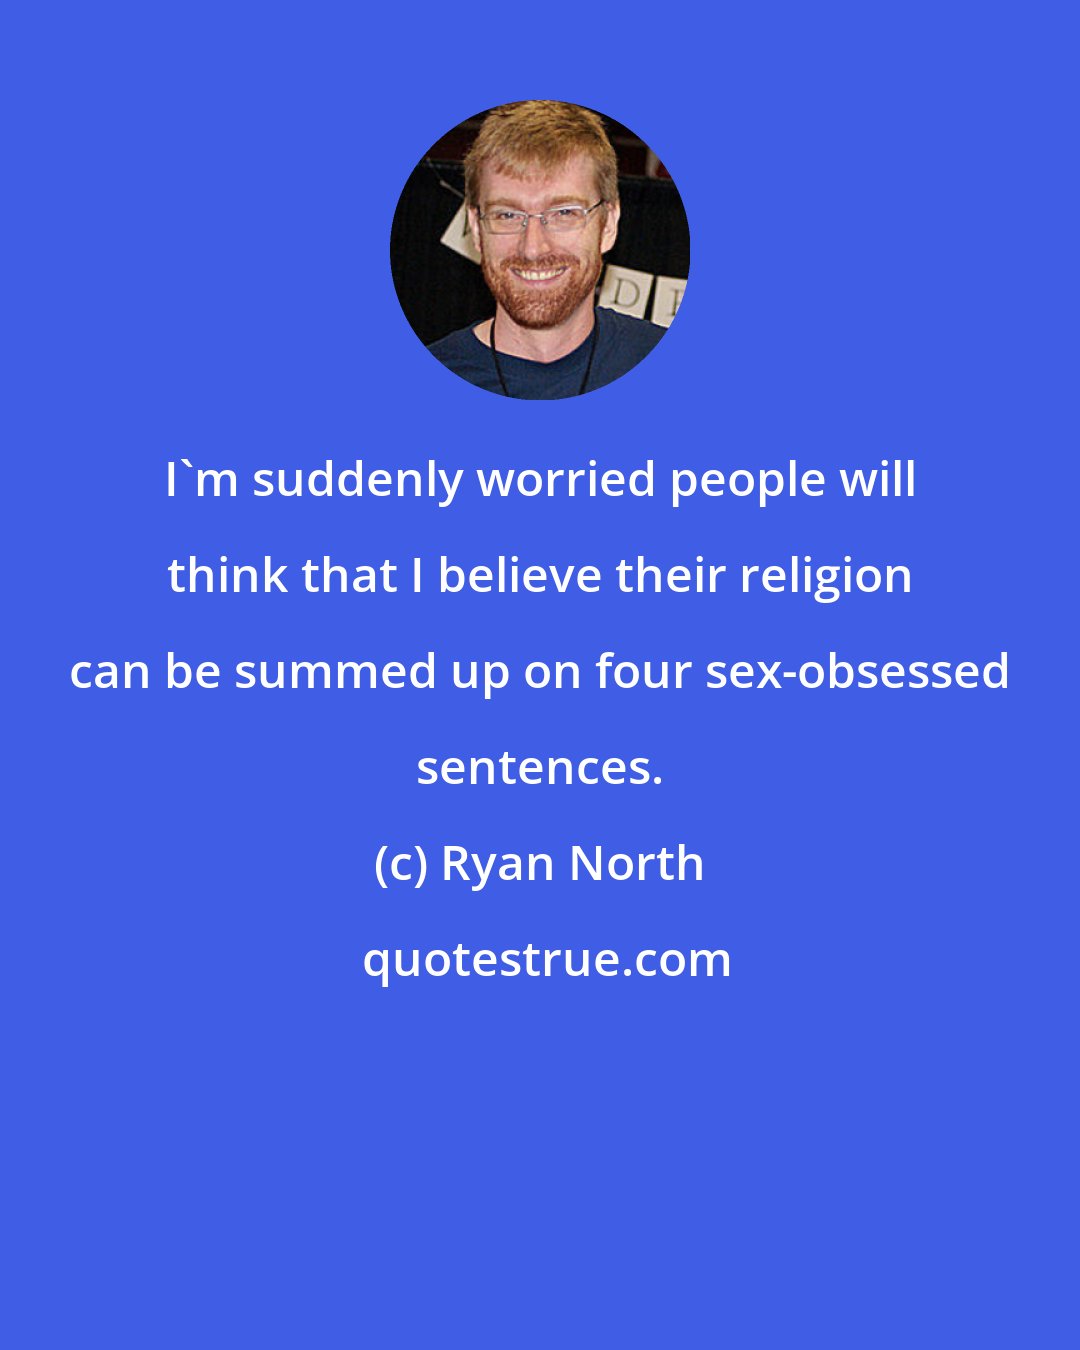 Ryan North: I'm suddenly worried people will think that I believe their religion can be summed up on four sex-obsessed sentences.